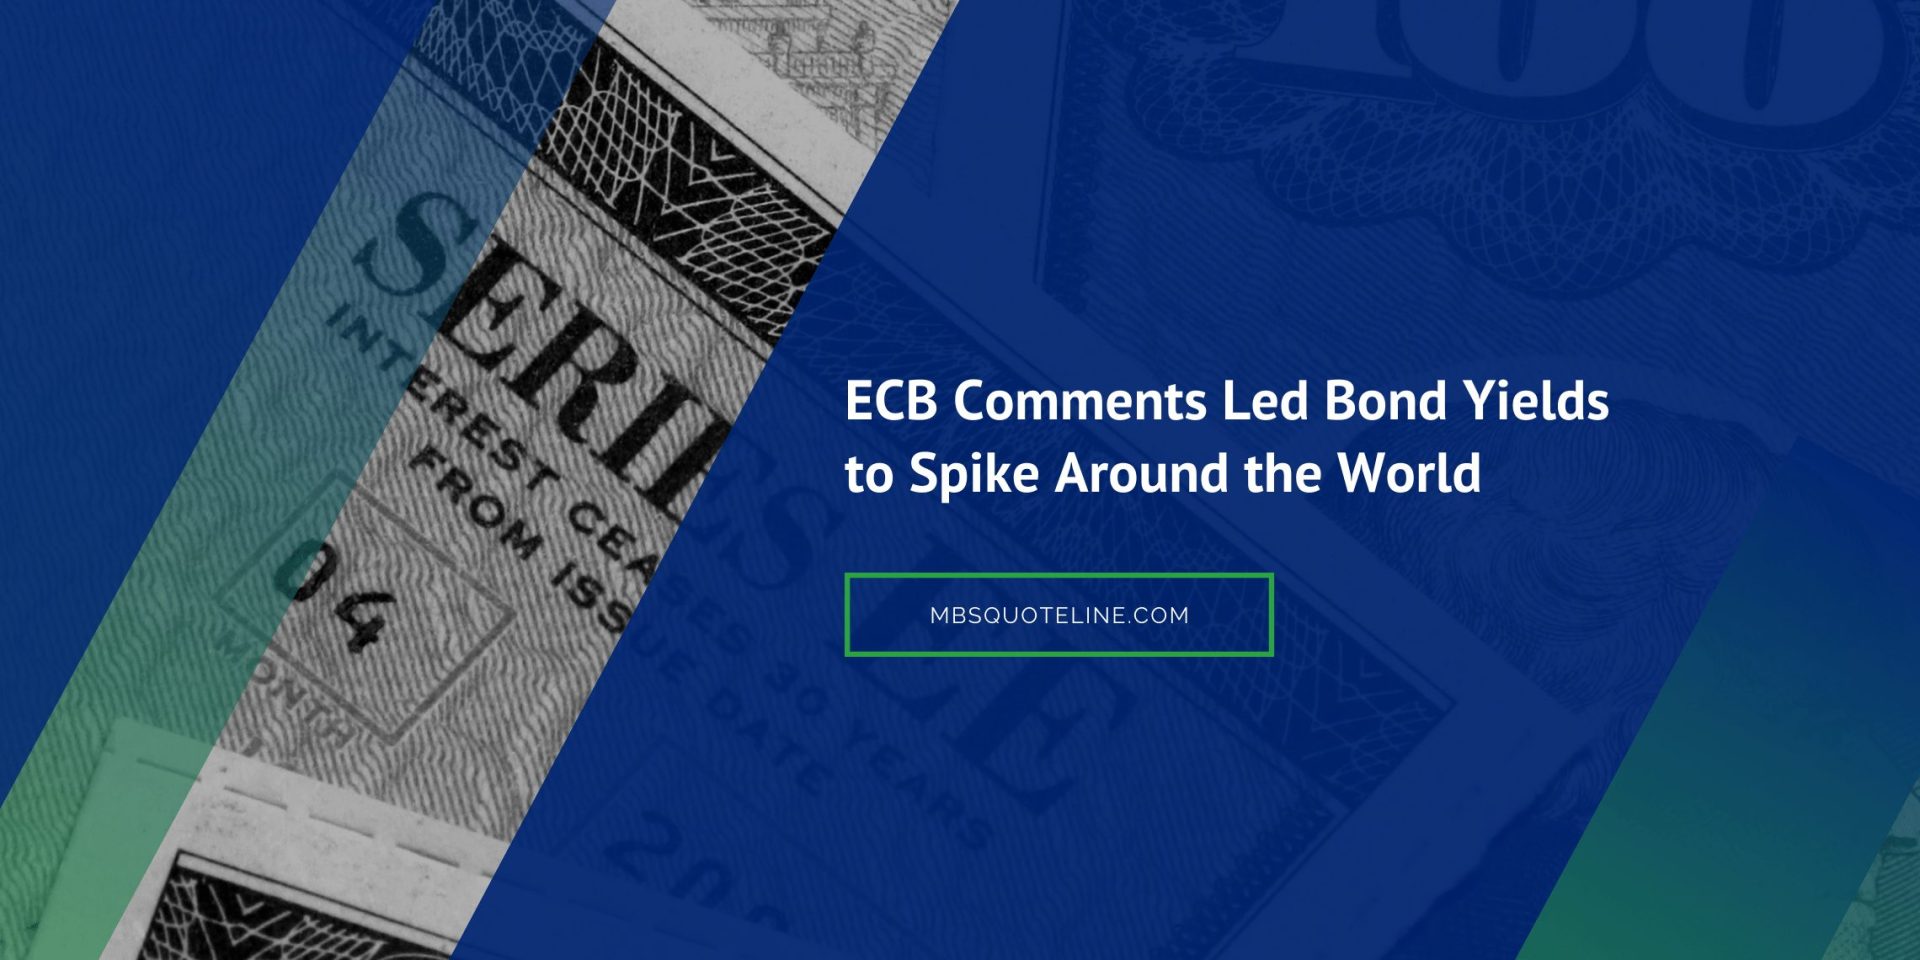 ecb comments led bond yields to spike around the world news mbsquoteline